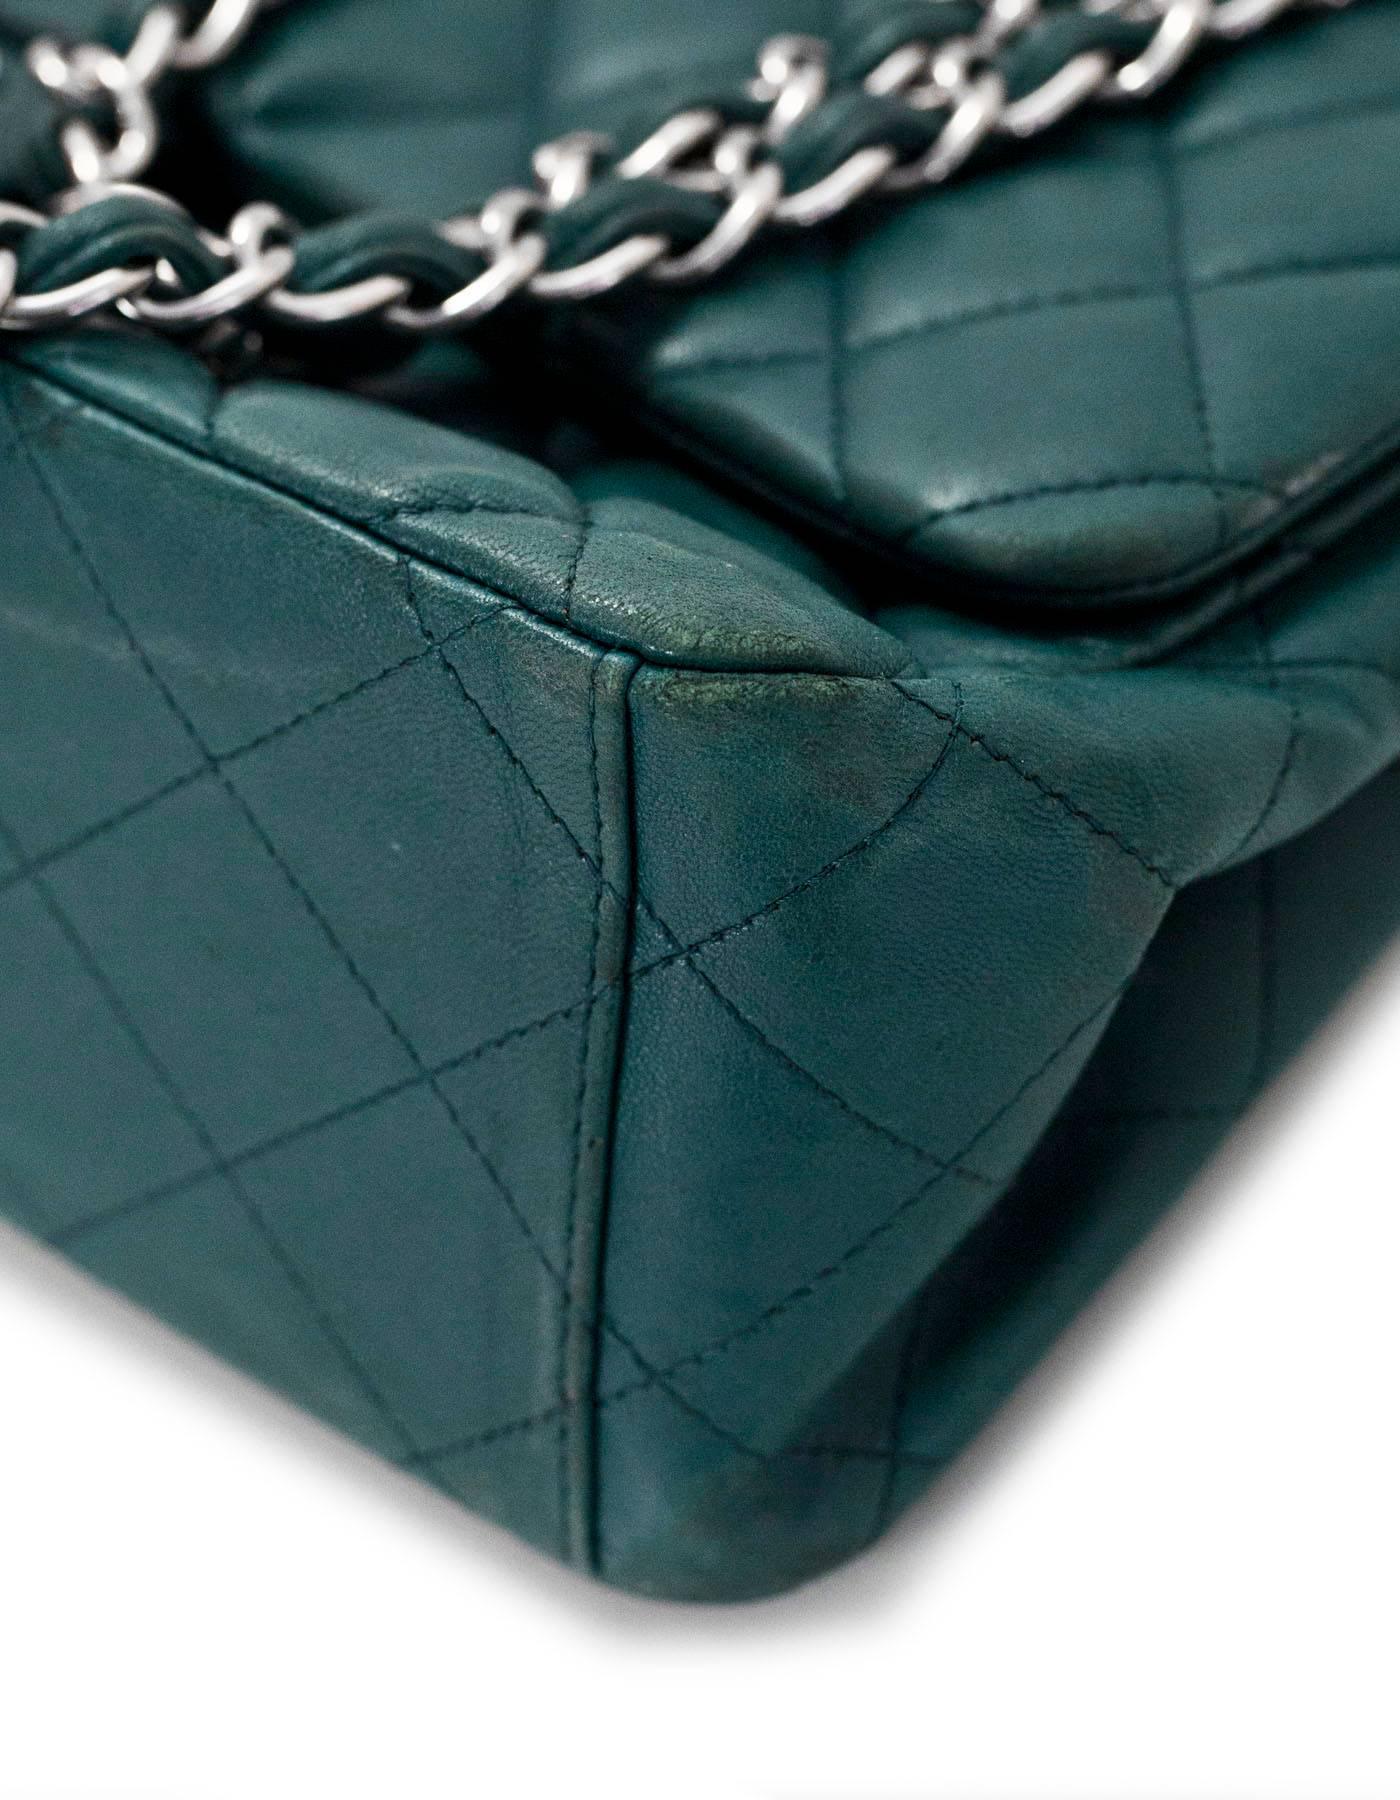 2/5 Chanel Teal Quilted Lambskin Leather Single Flap Classic Maxi Bag 3